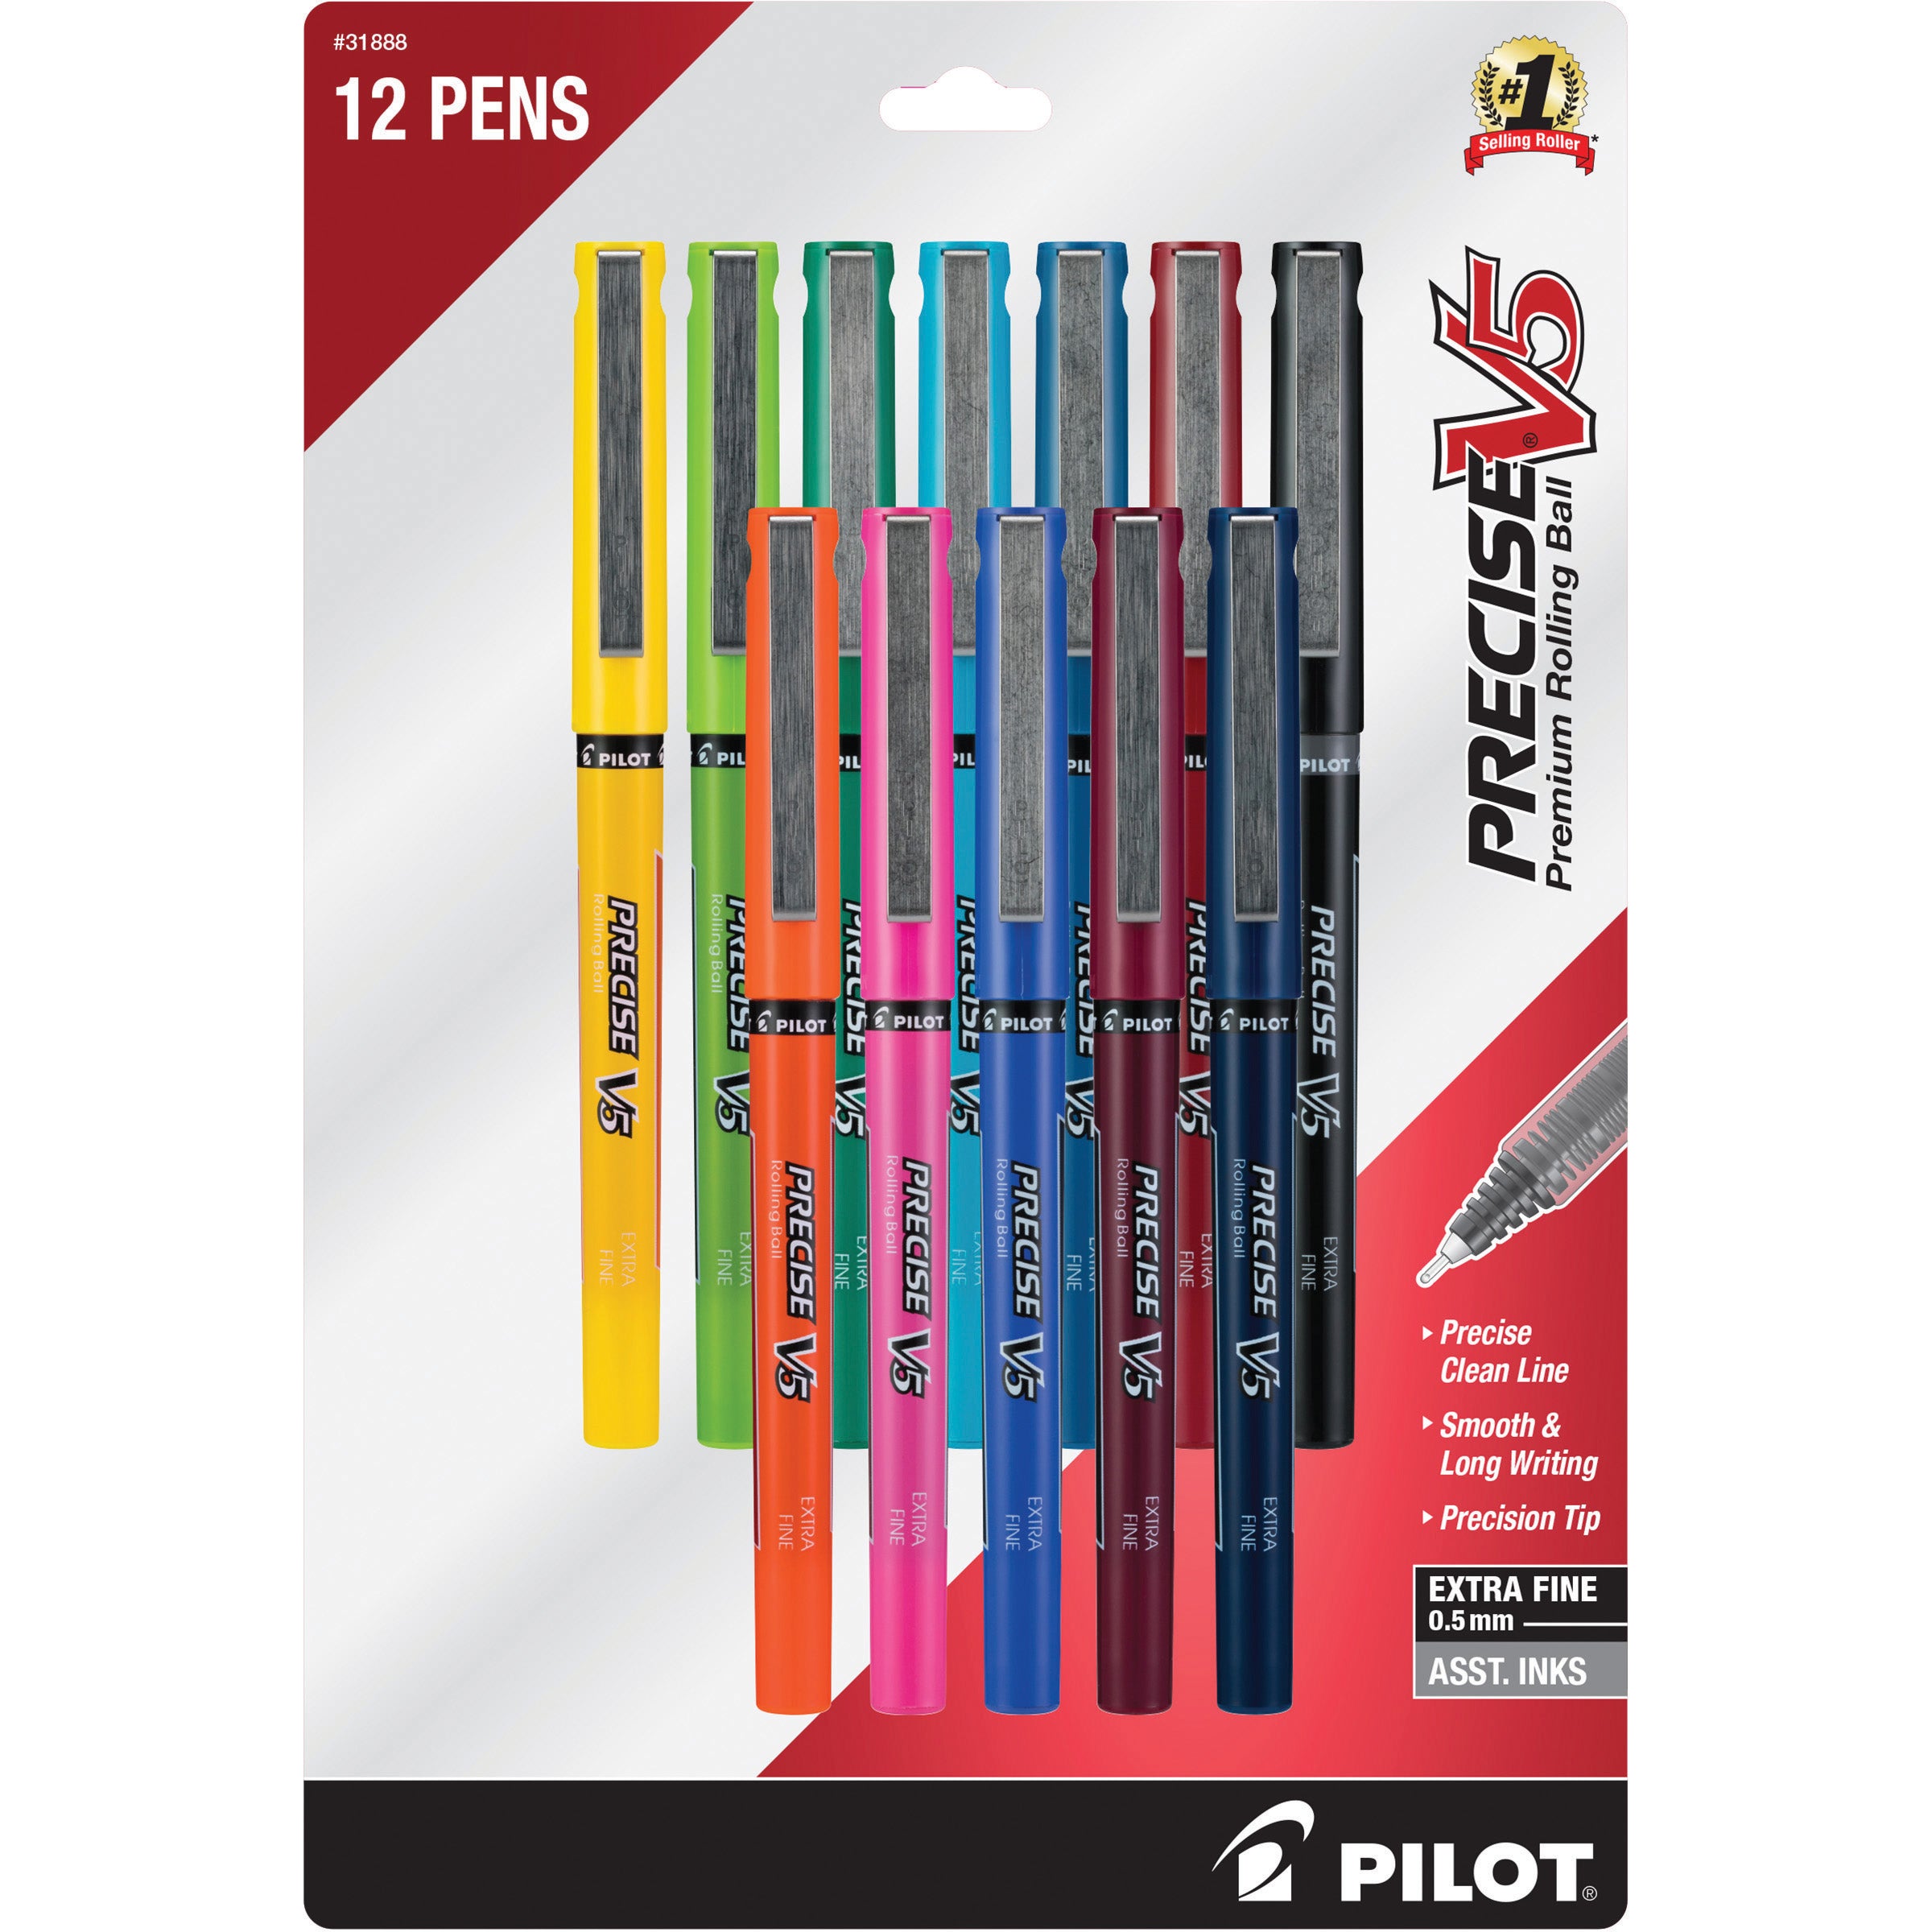 Pilot 31888 Precise V5 Rolling Ball Stick Pens with Liquid Ink, Extra Fine Point, 12-Pack, Assorted Colors